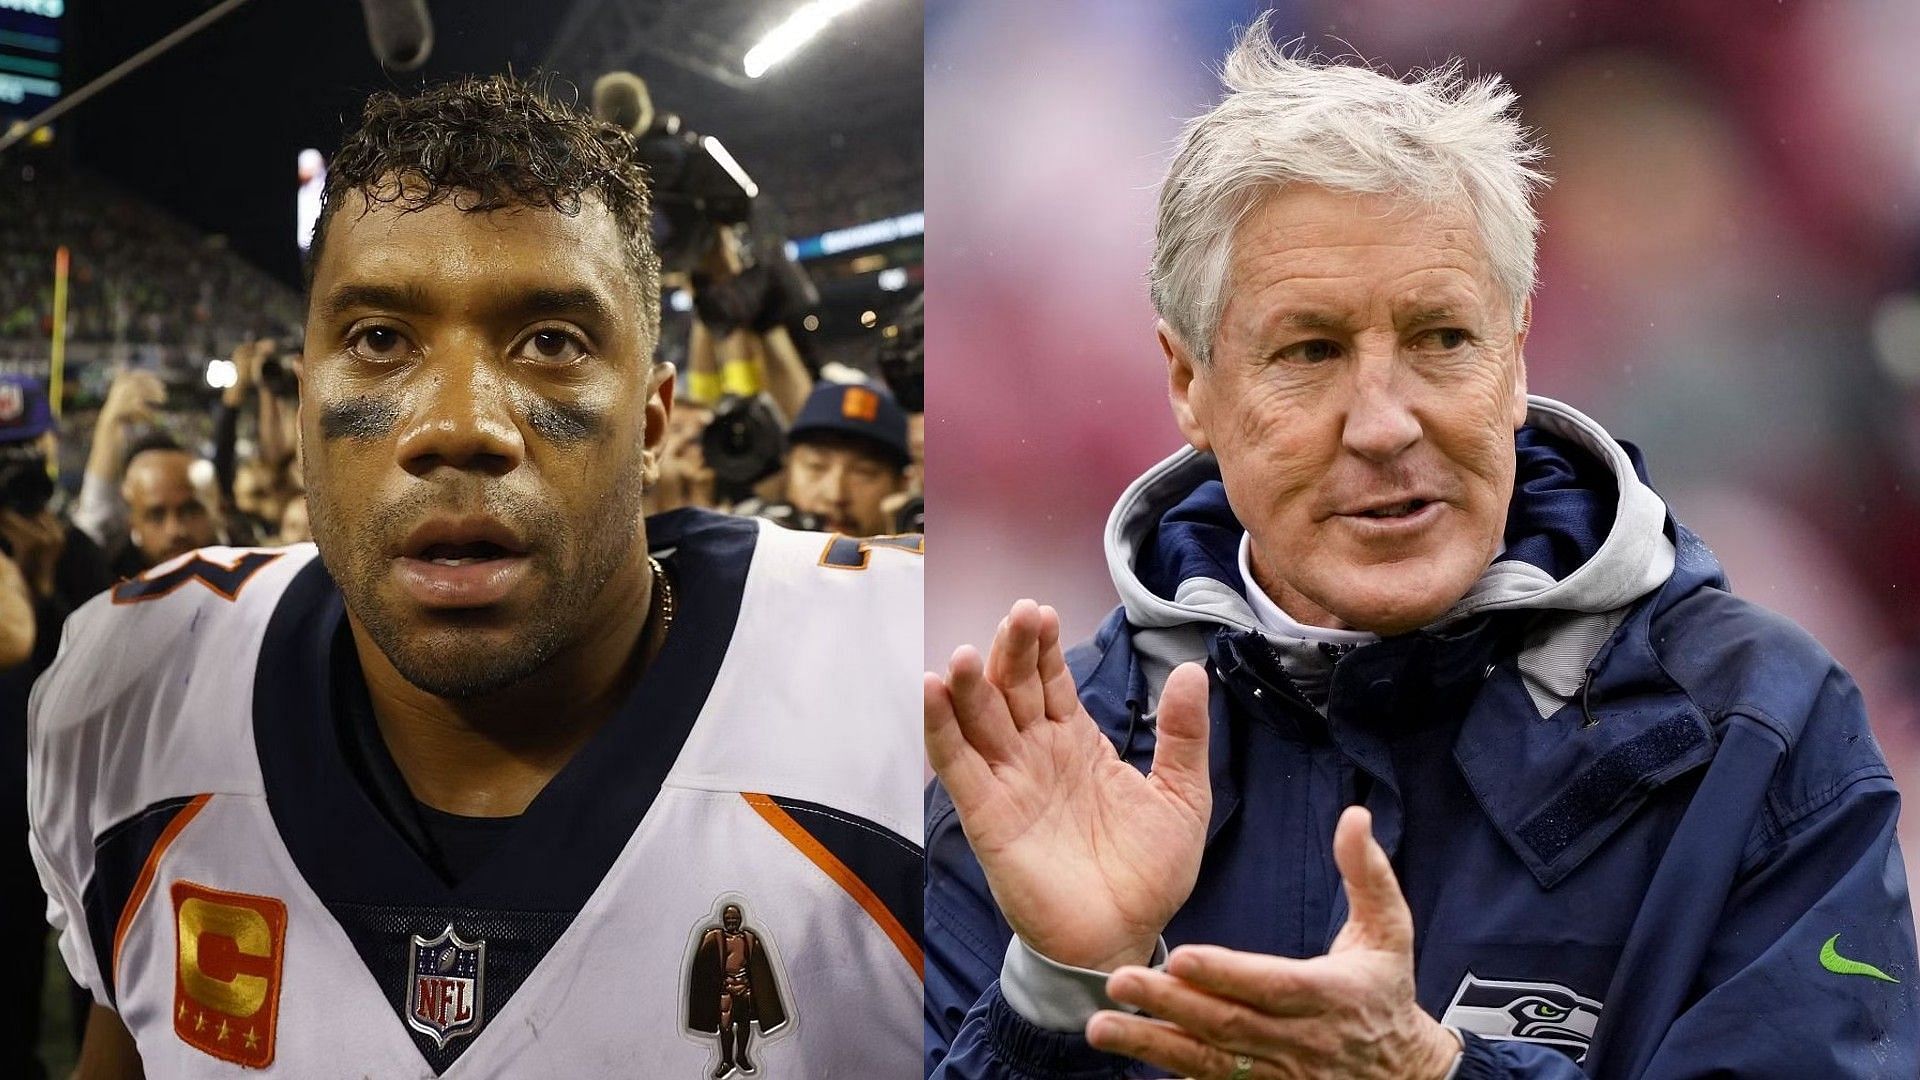 Russell Wilson treated with kid gloves by Pete Carroll, KJ Wright claims